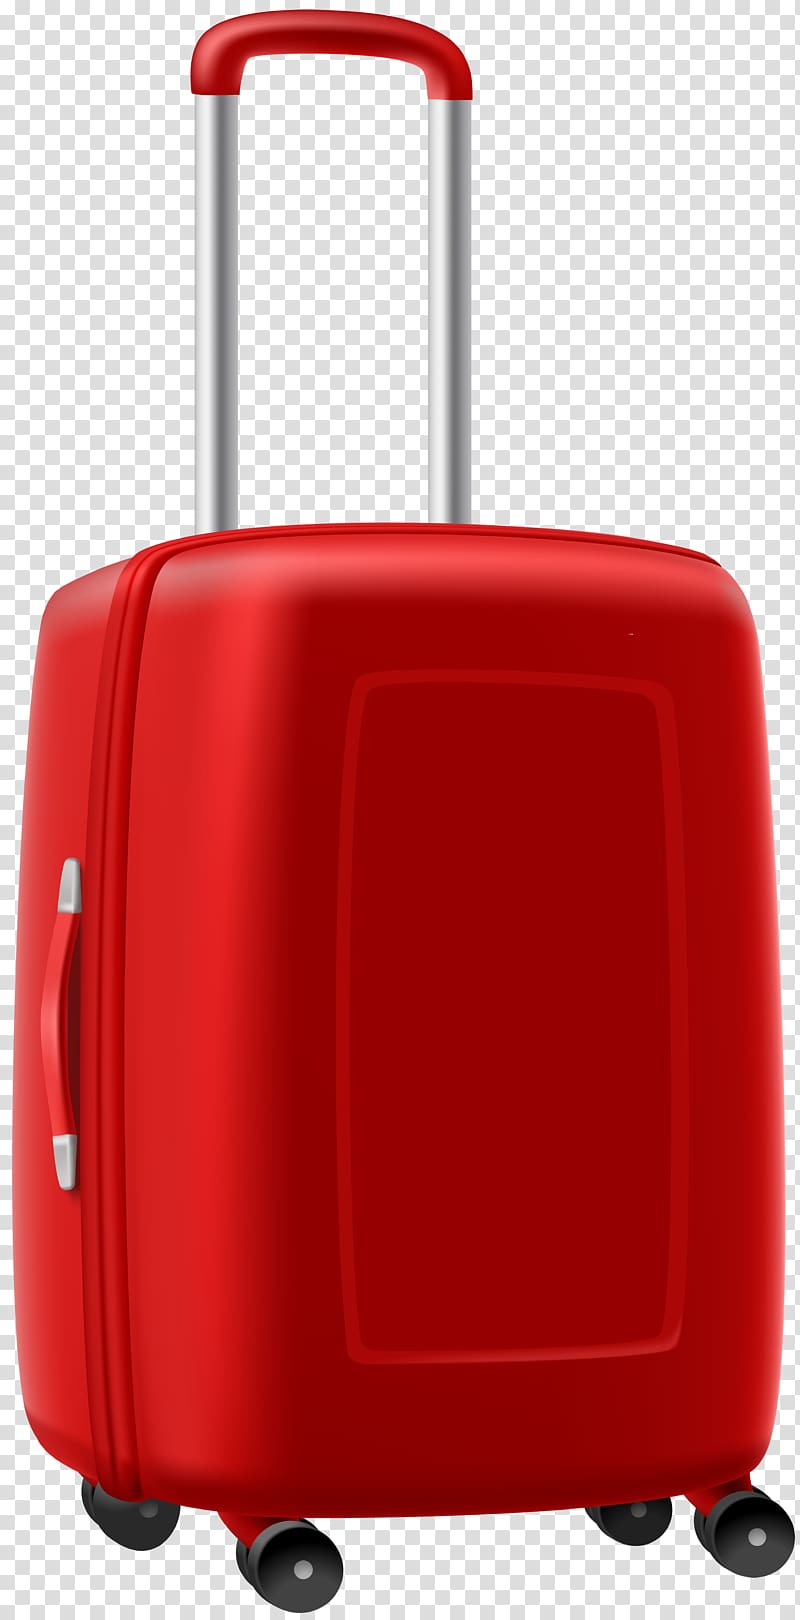 Luggage clipart trolly bag. Red suitcase baggage trolley